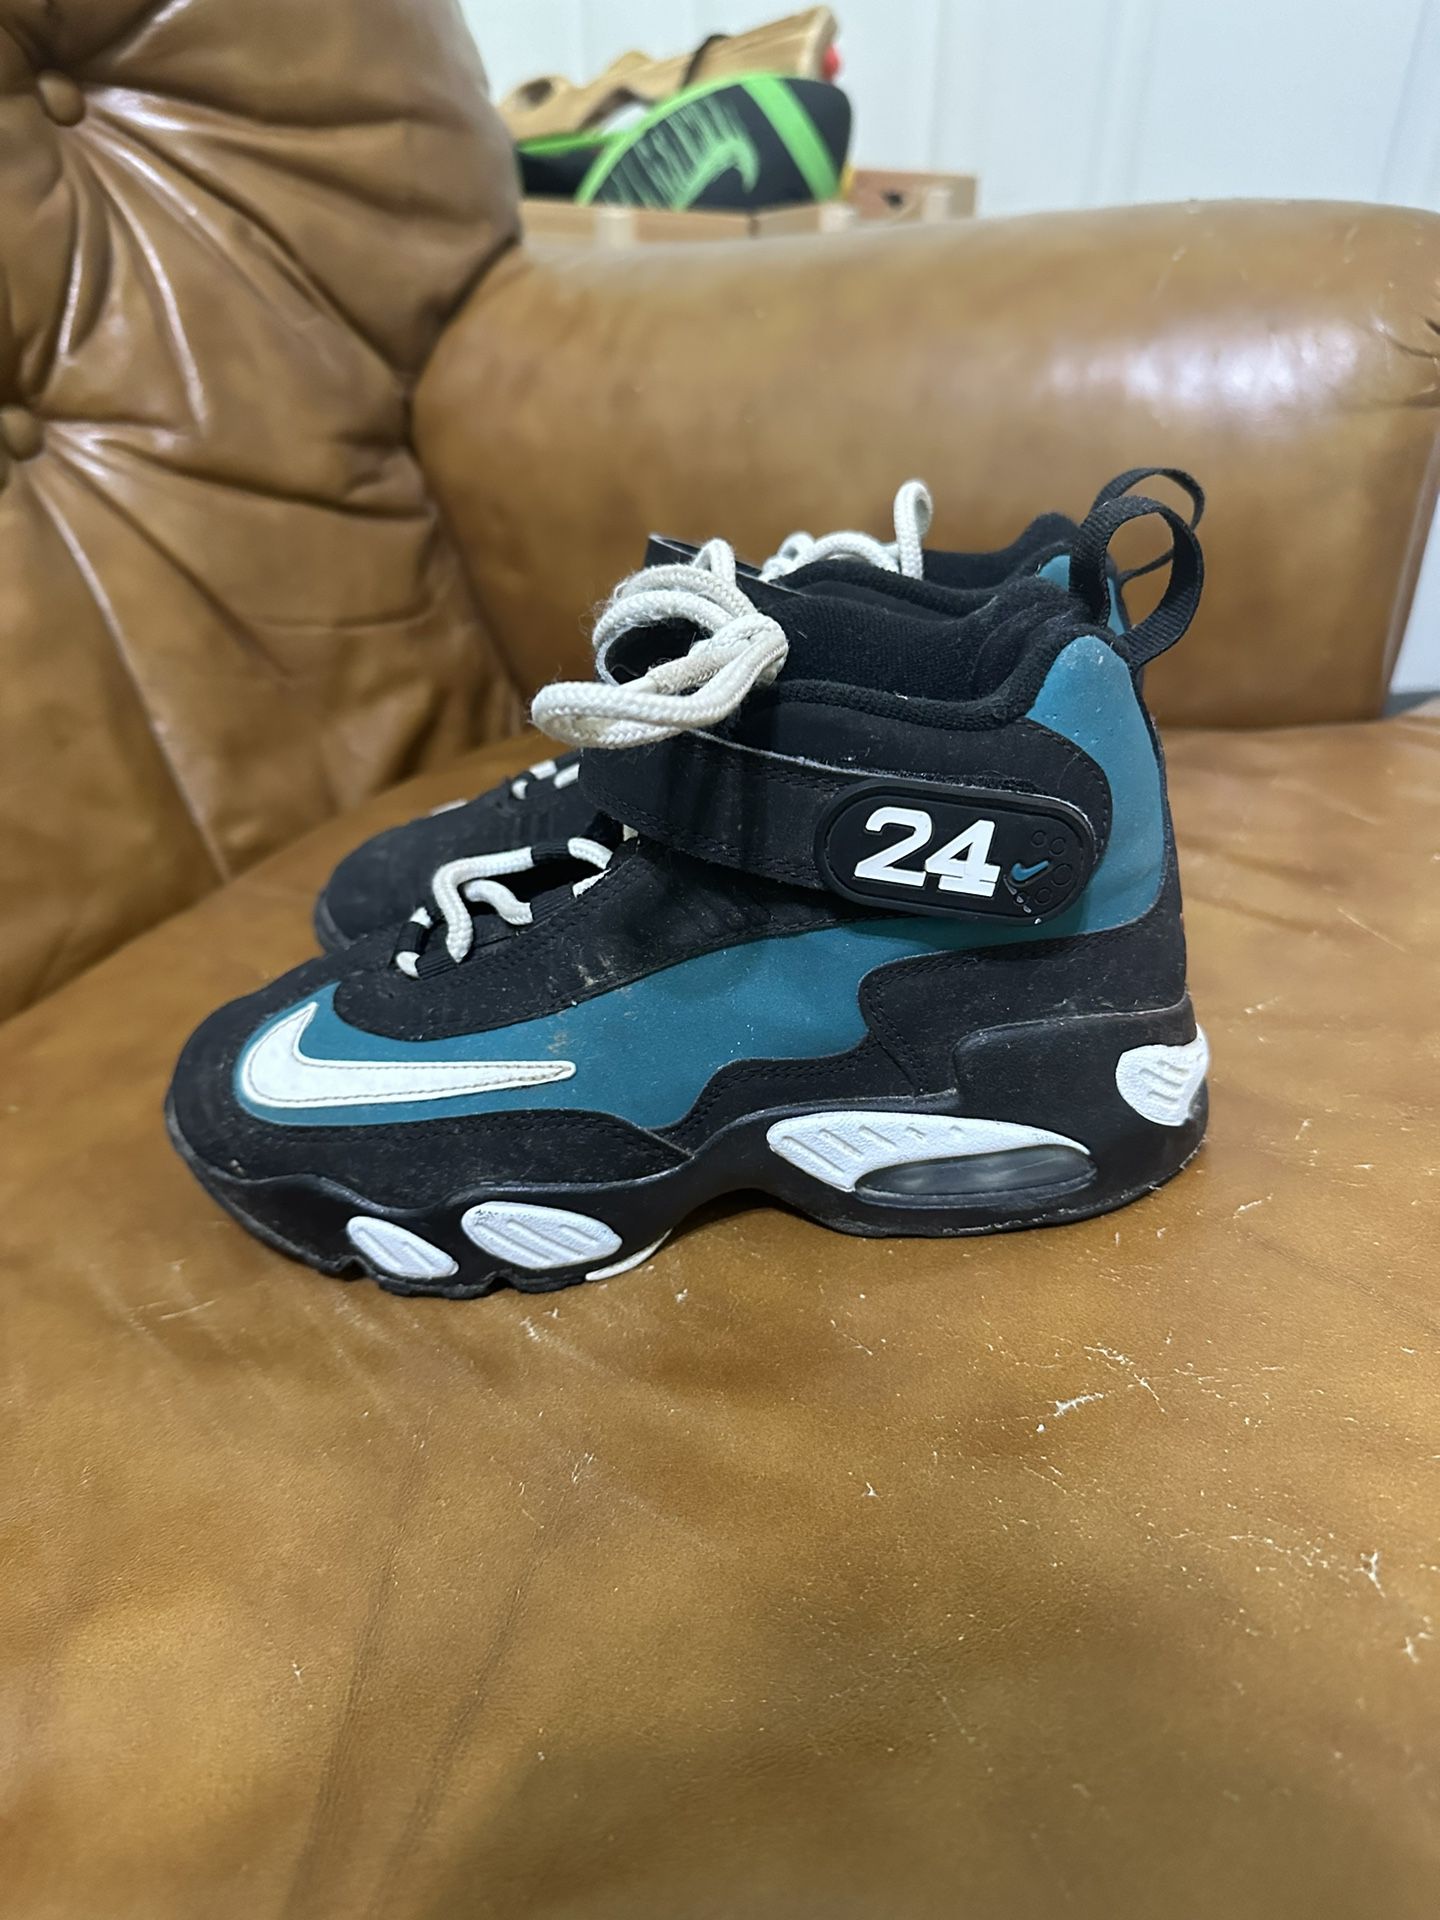 Kids Griffey Nikes Shoes Size 2.5 Youth 